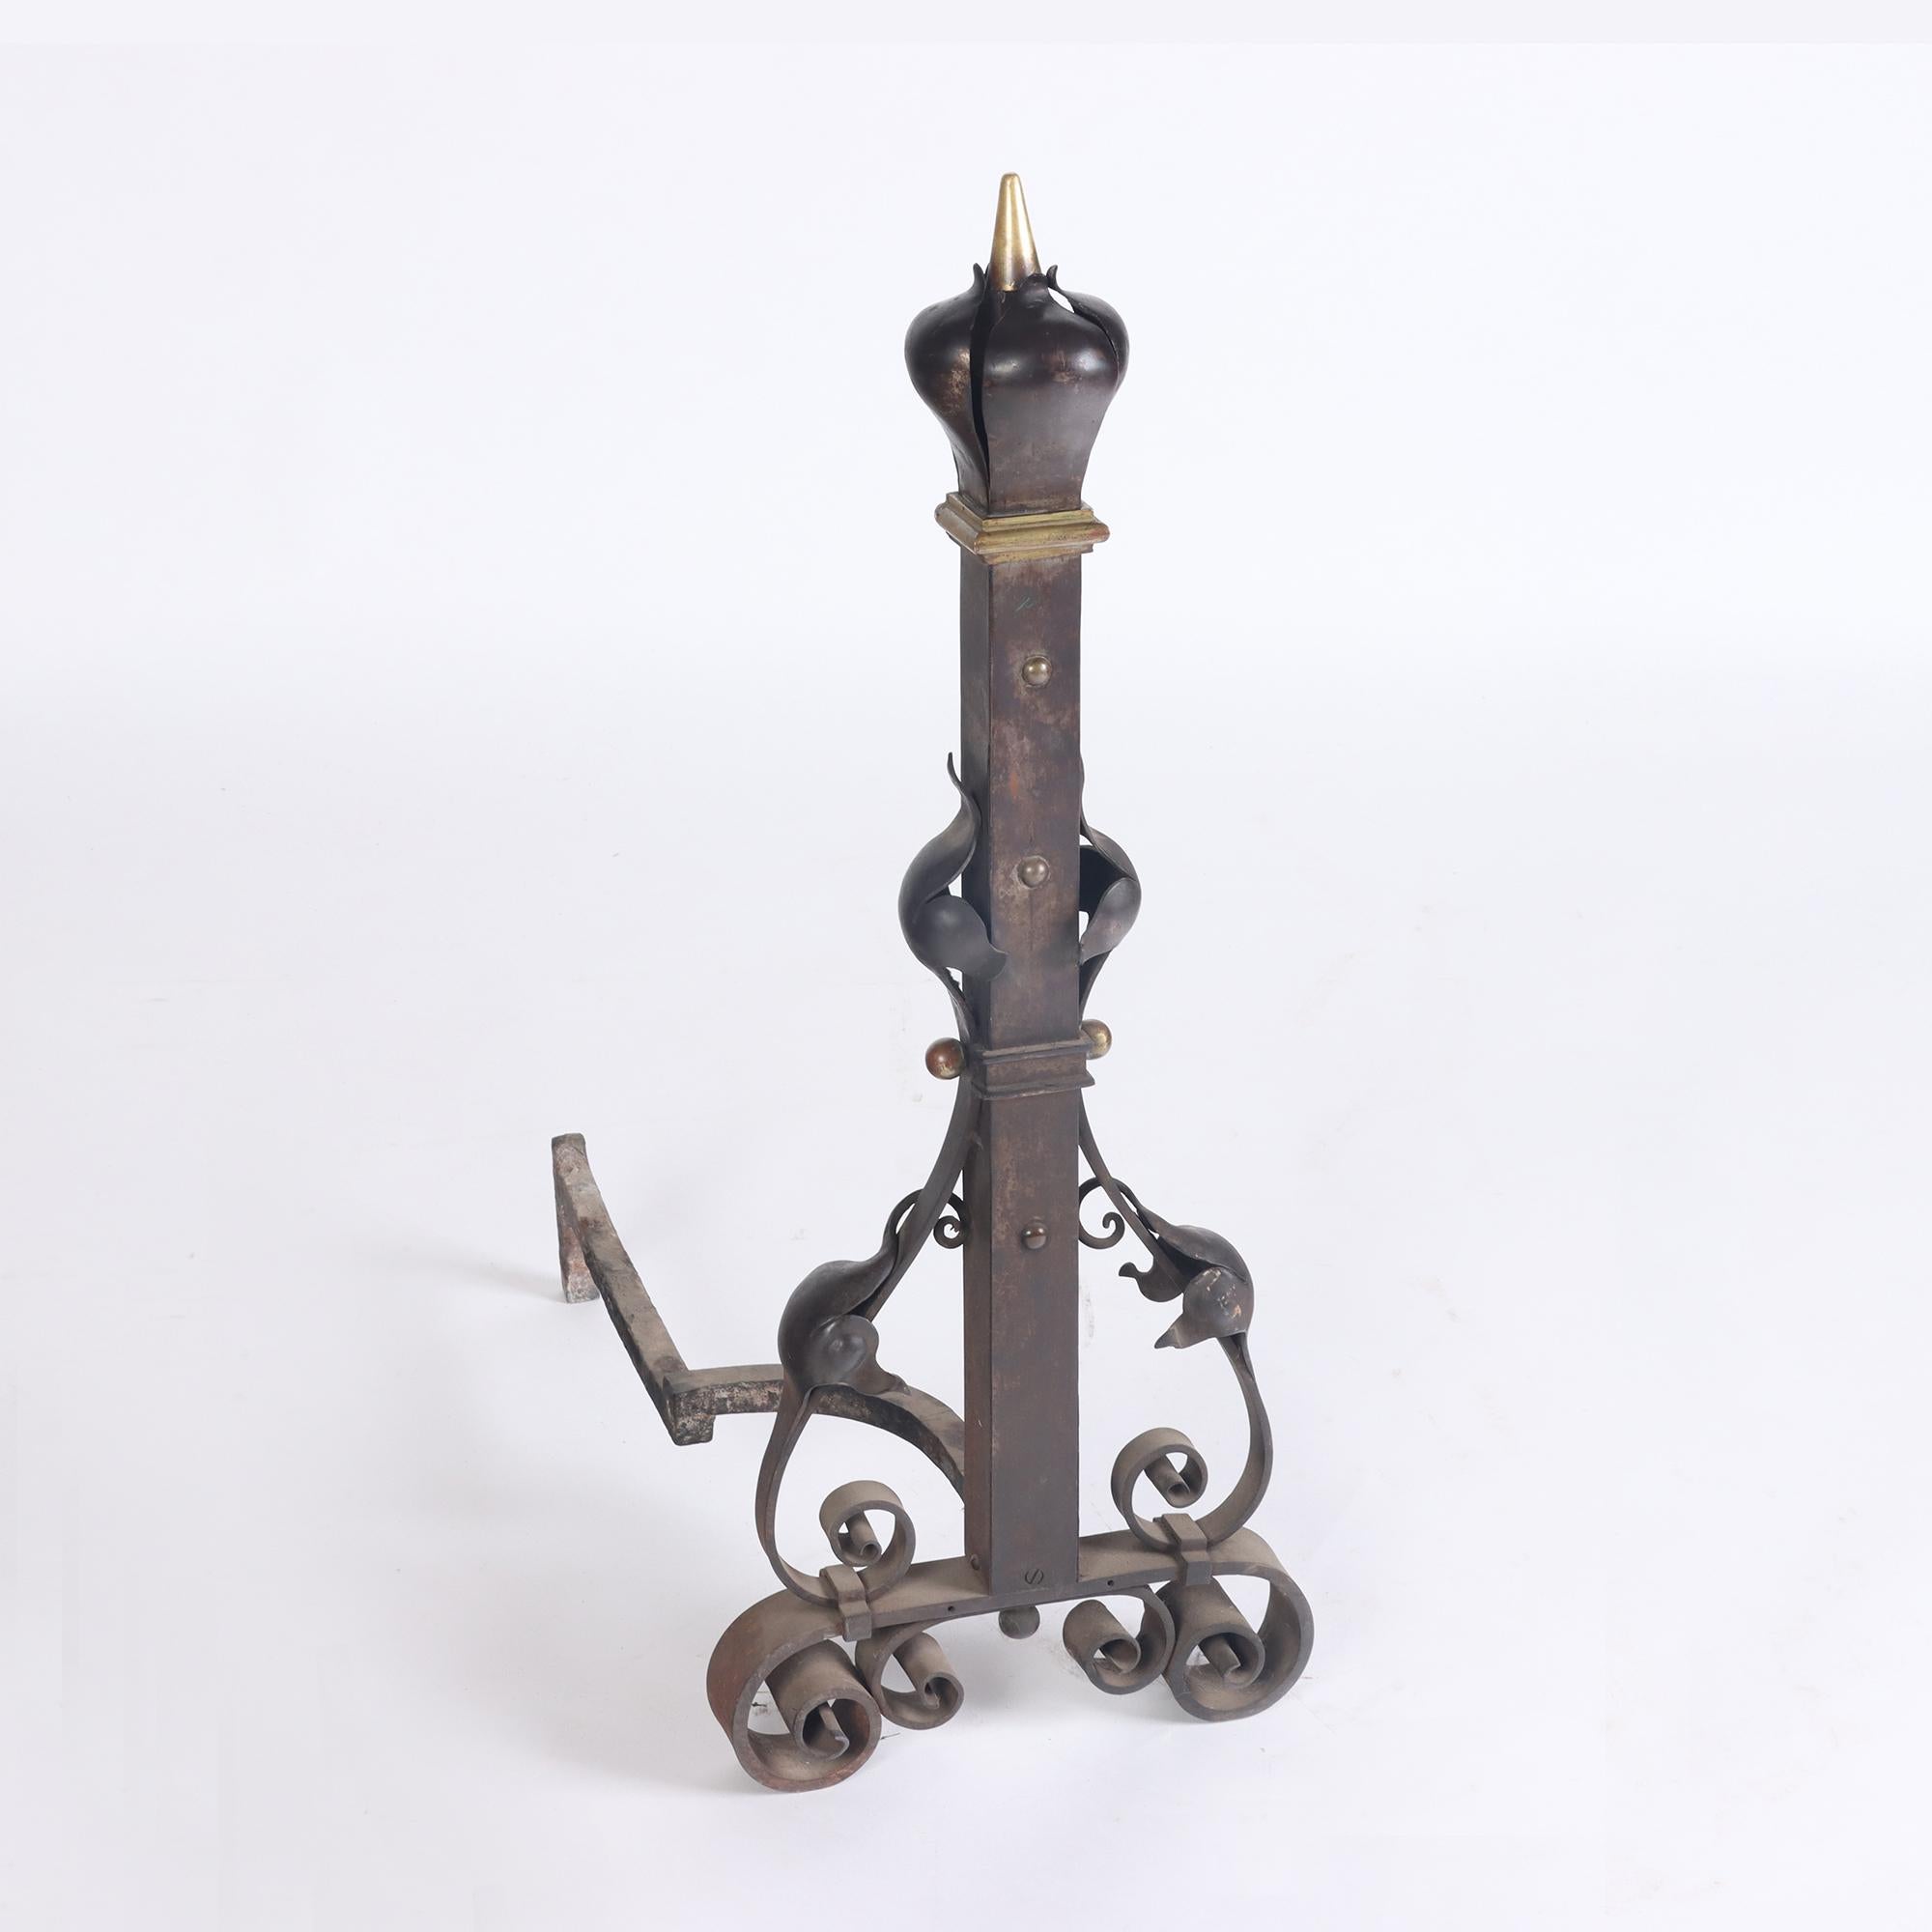 A substantial and monumental pair of nineteenth century French wrought iron and bronze andirons. Having stylized floral finials over bronze mounted column form post with stylized leaf decoration all raised on scrolling base.